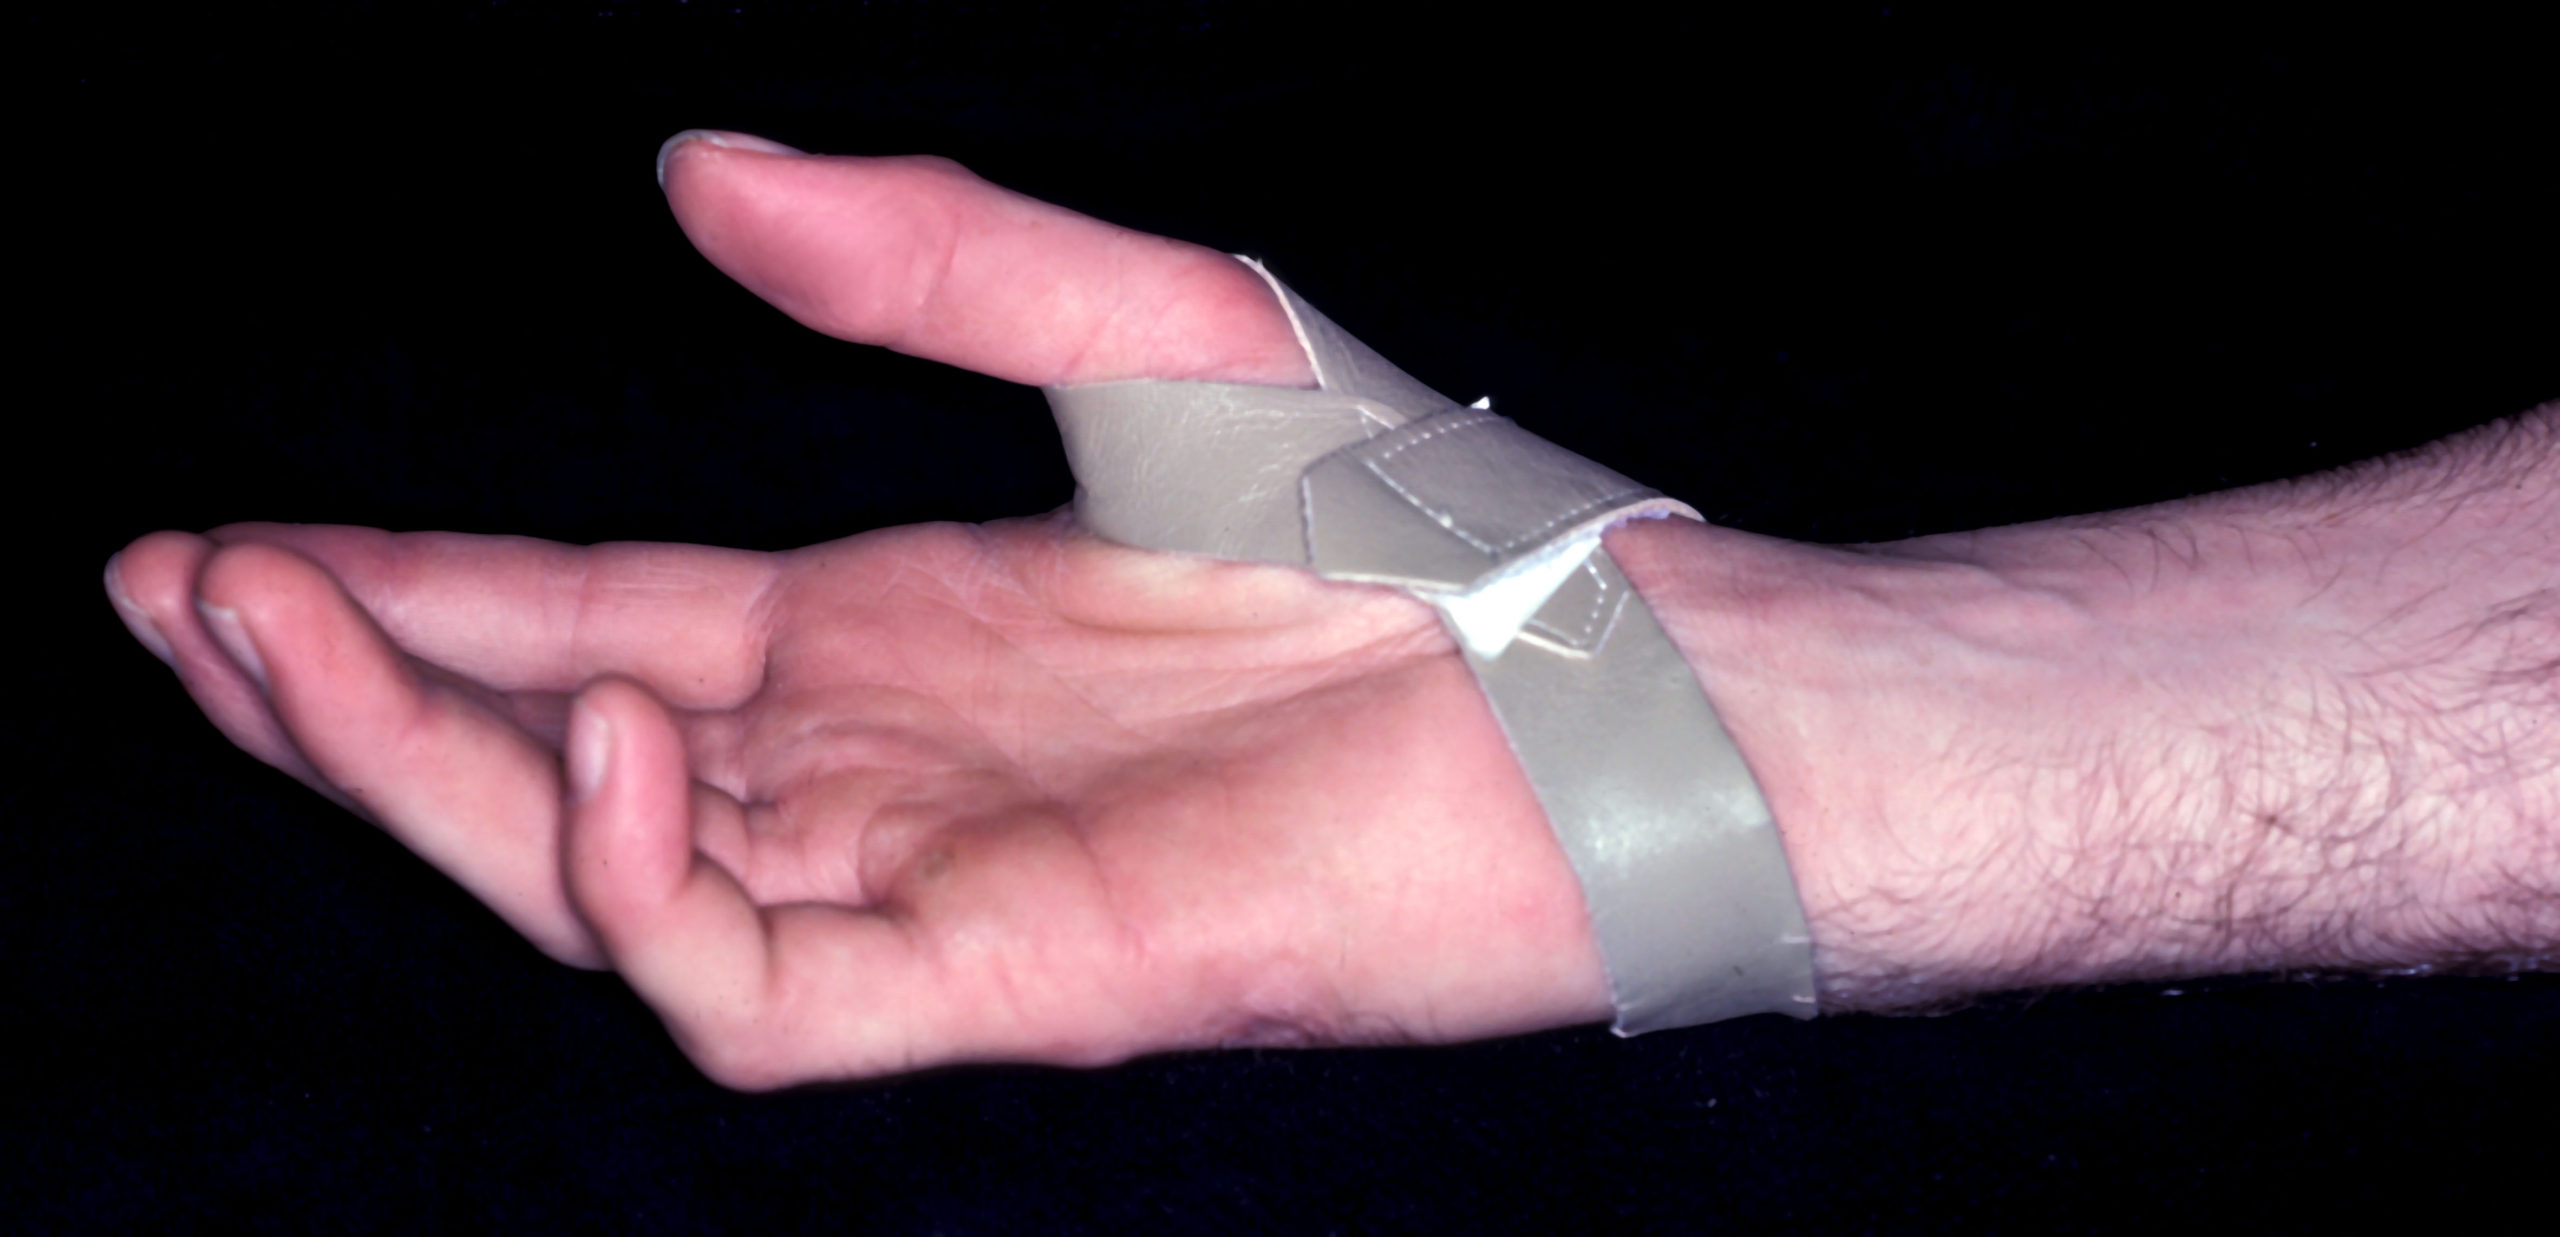 Splinting the Hand with a Peripheral Nerve Injury